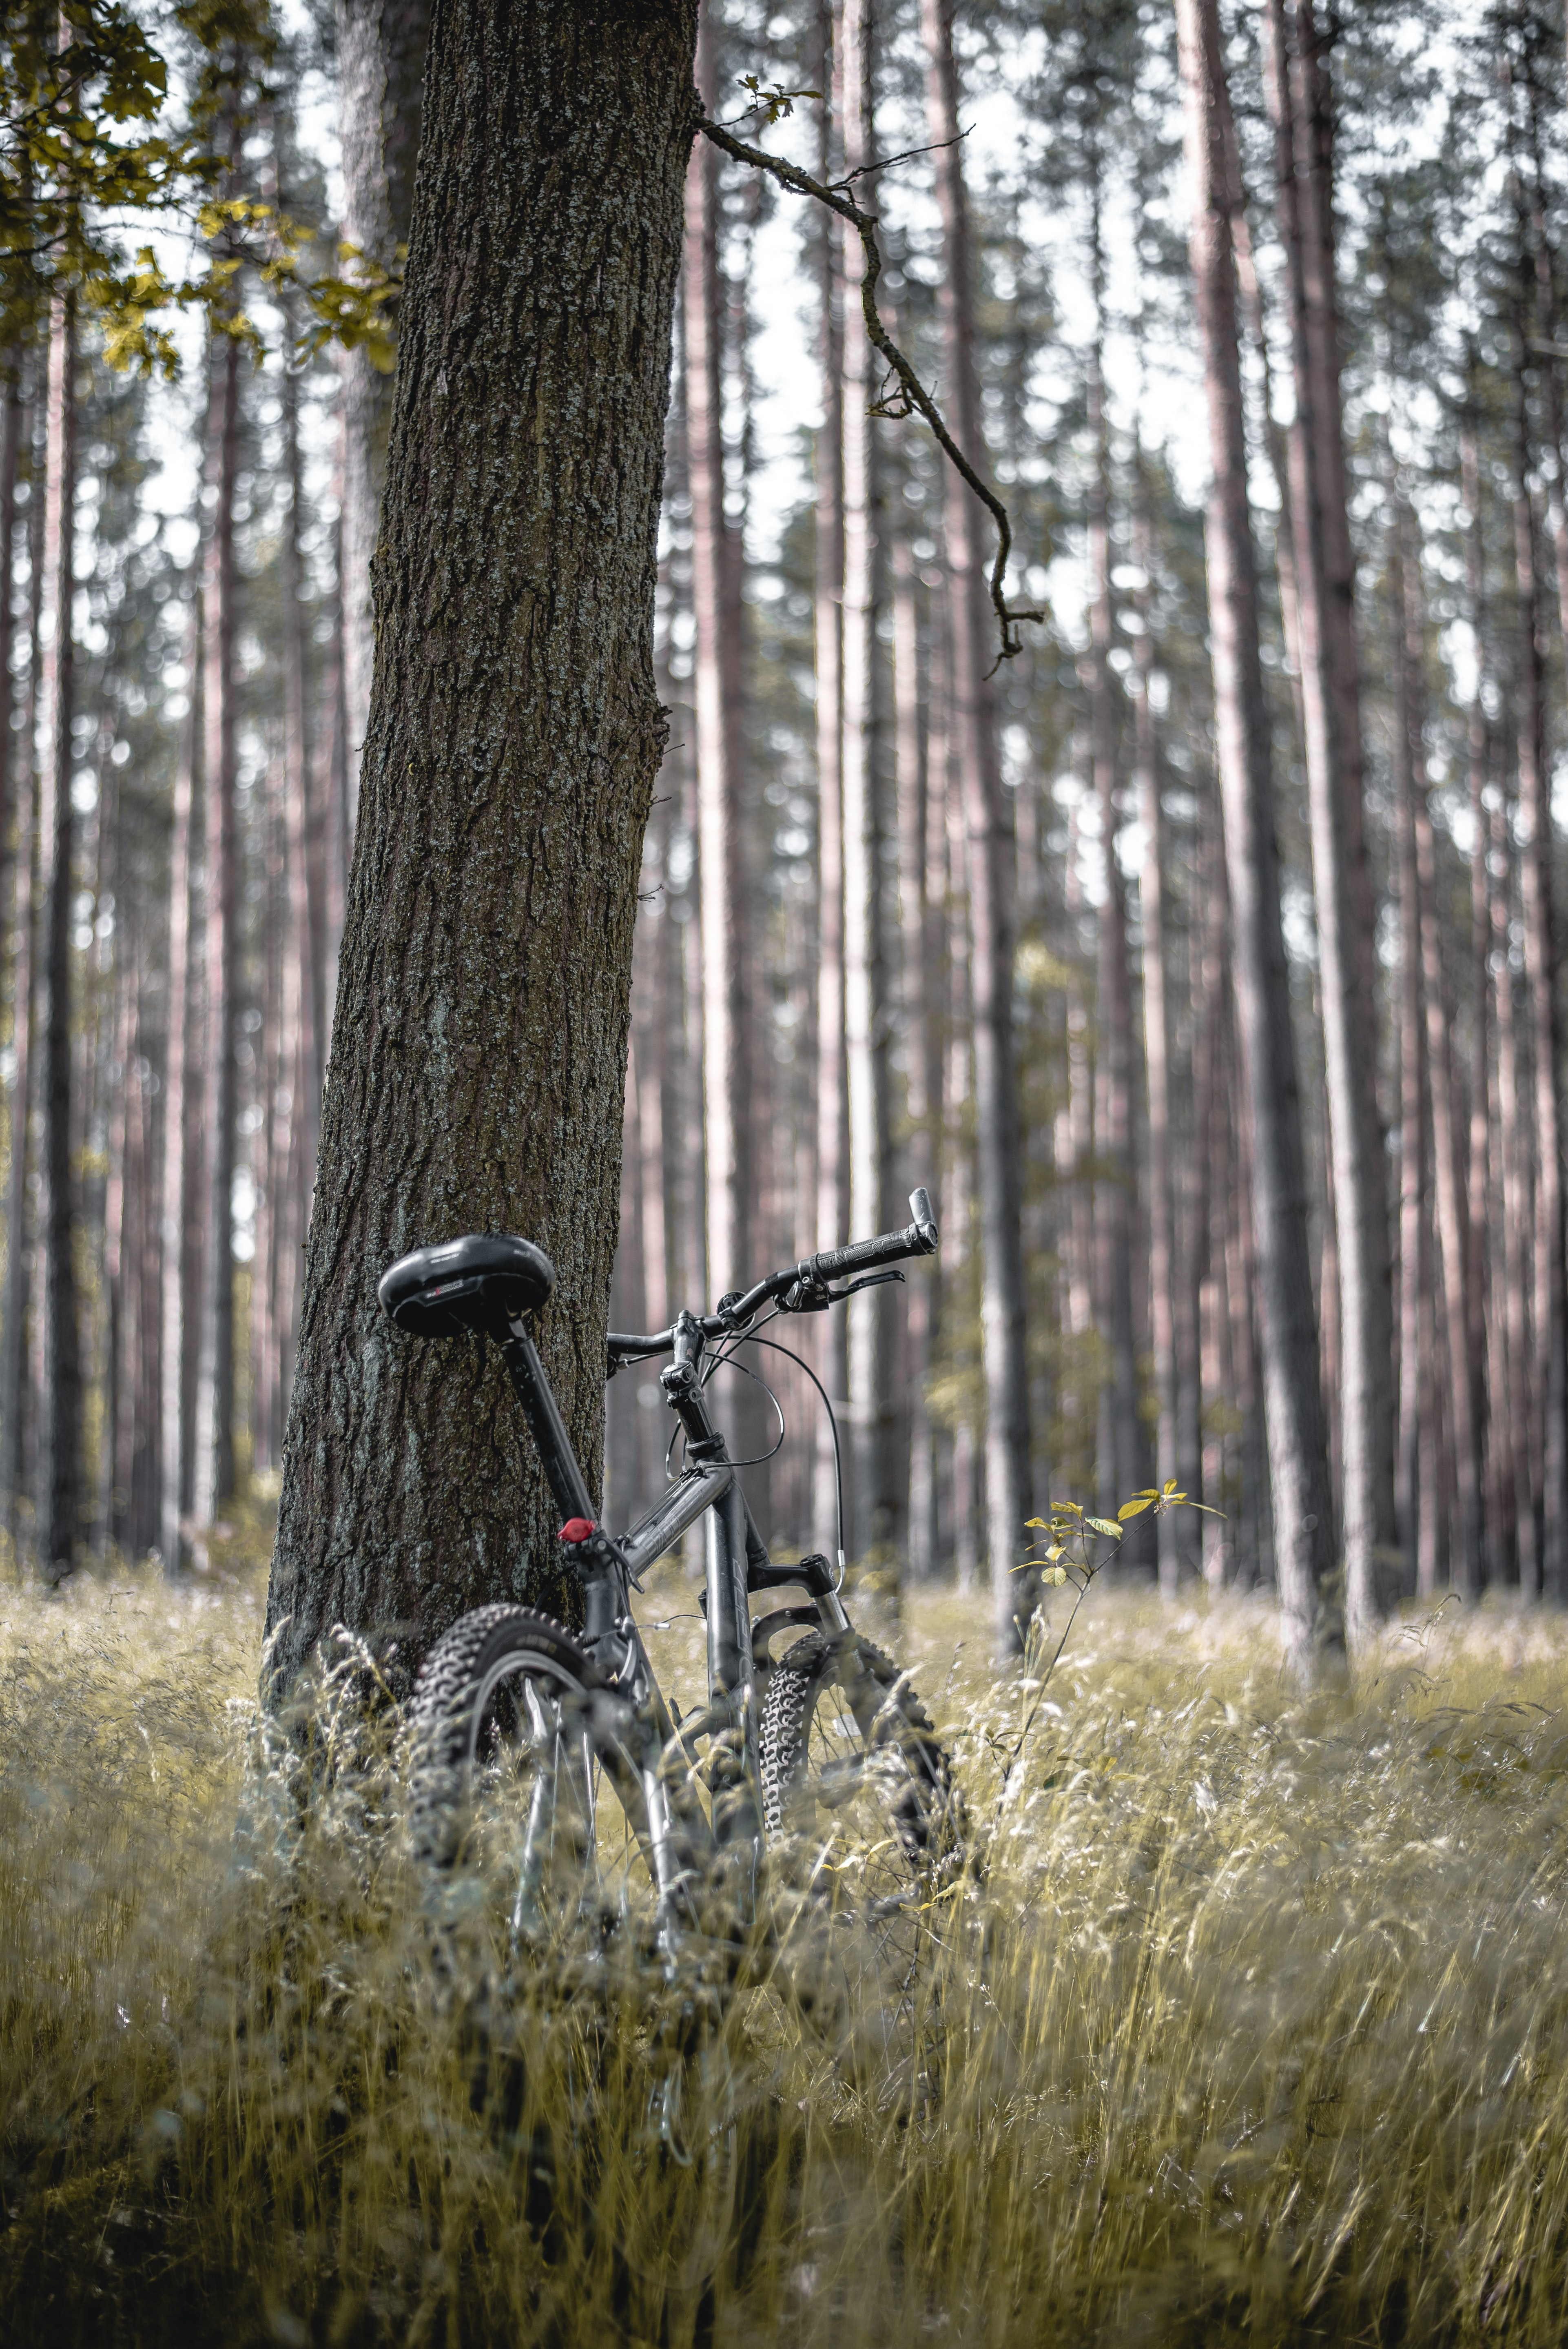 miscellaneous, trees, miscellanea, forest, stroll, bicycle iphone wallpaper